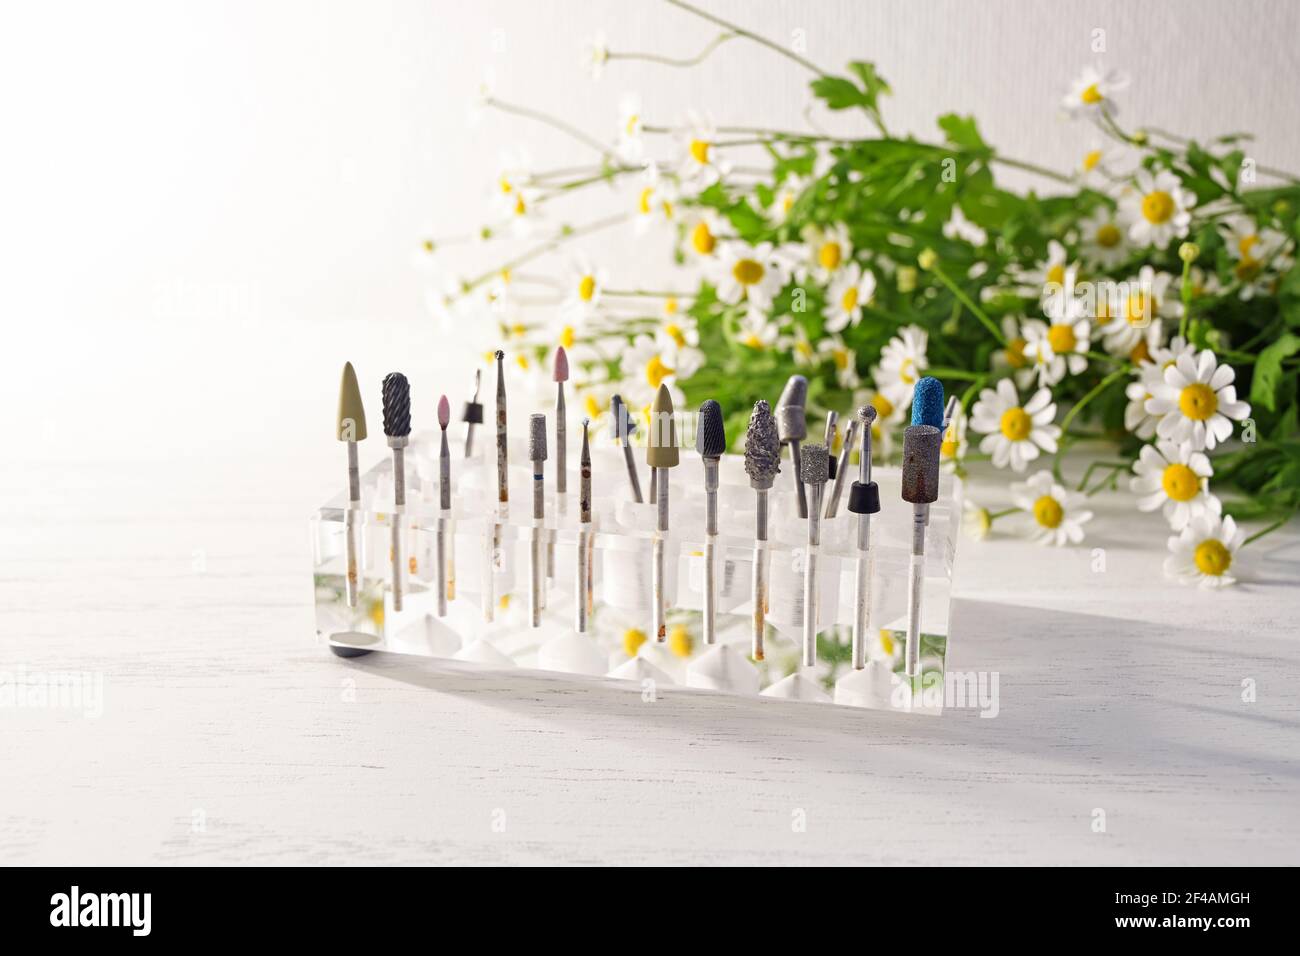 Cosmetic grinding and polishing tools for beauty and health care treatments such as manicure and pedicure in a transparent holder, blurry flowers in t Stock Photo